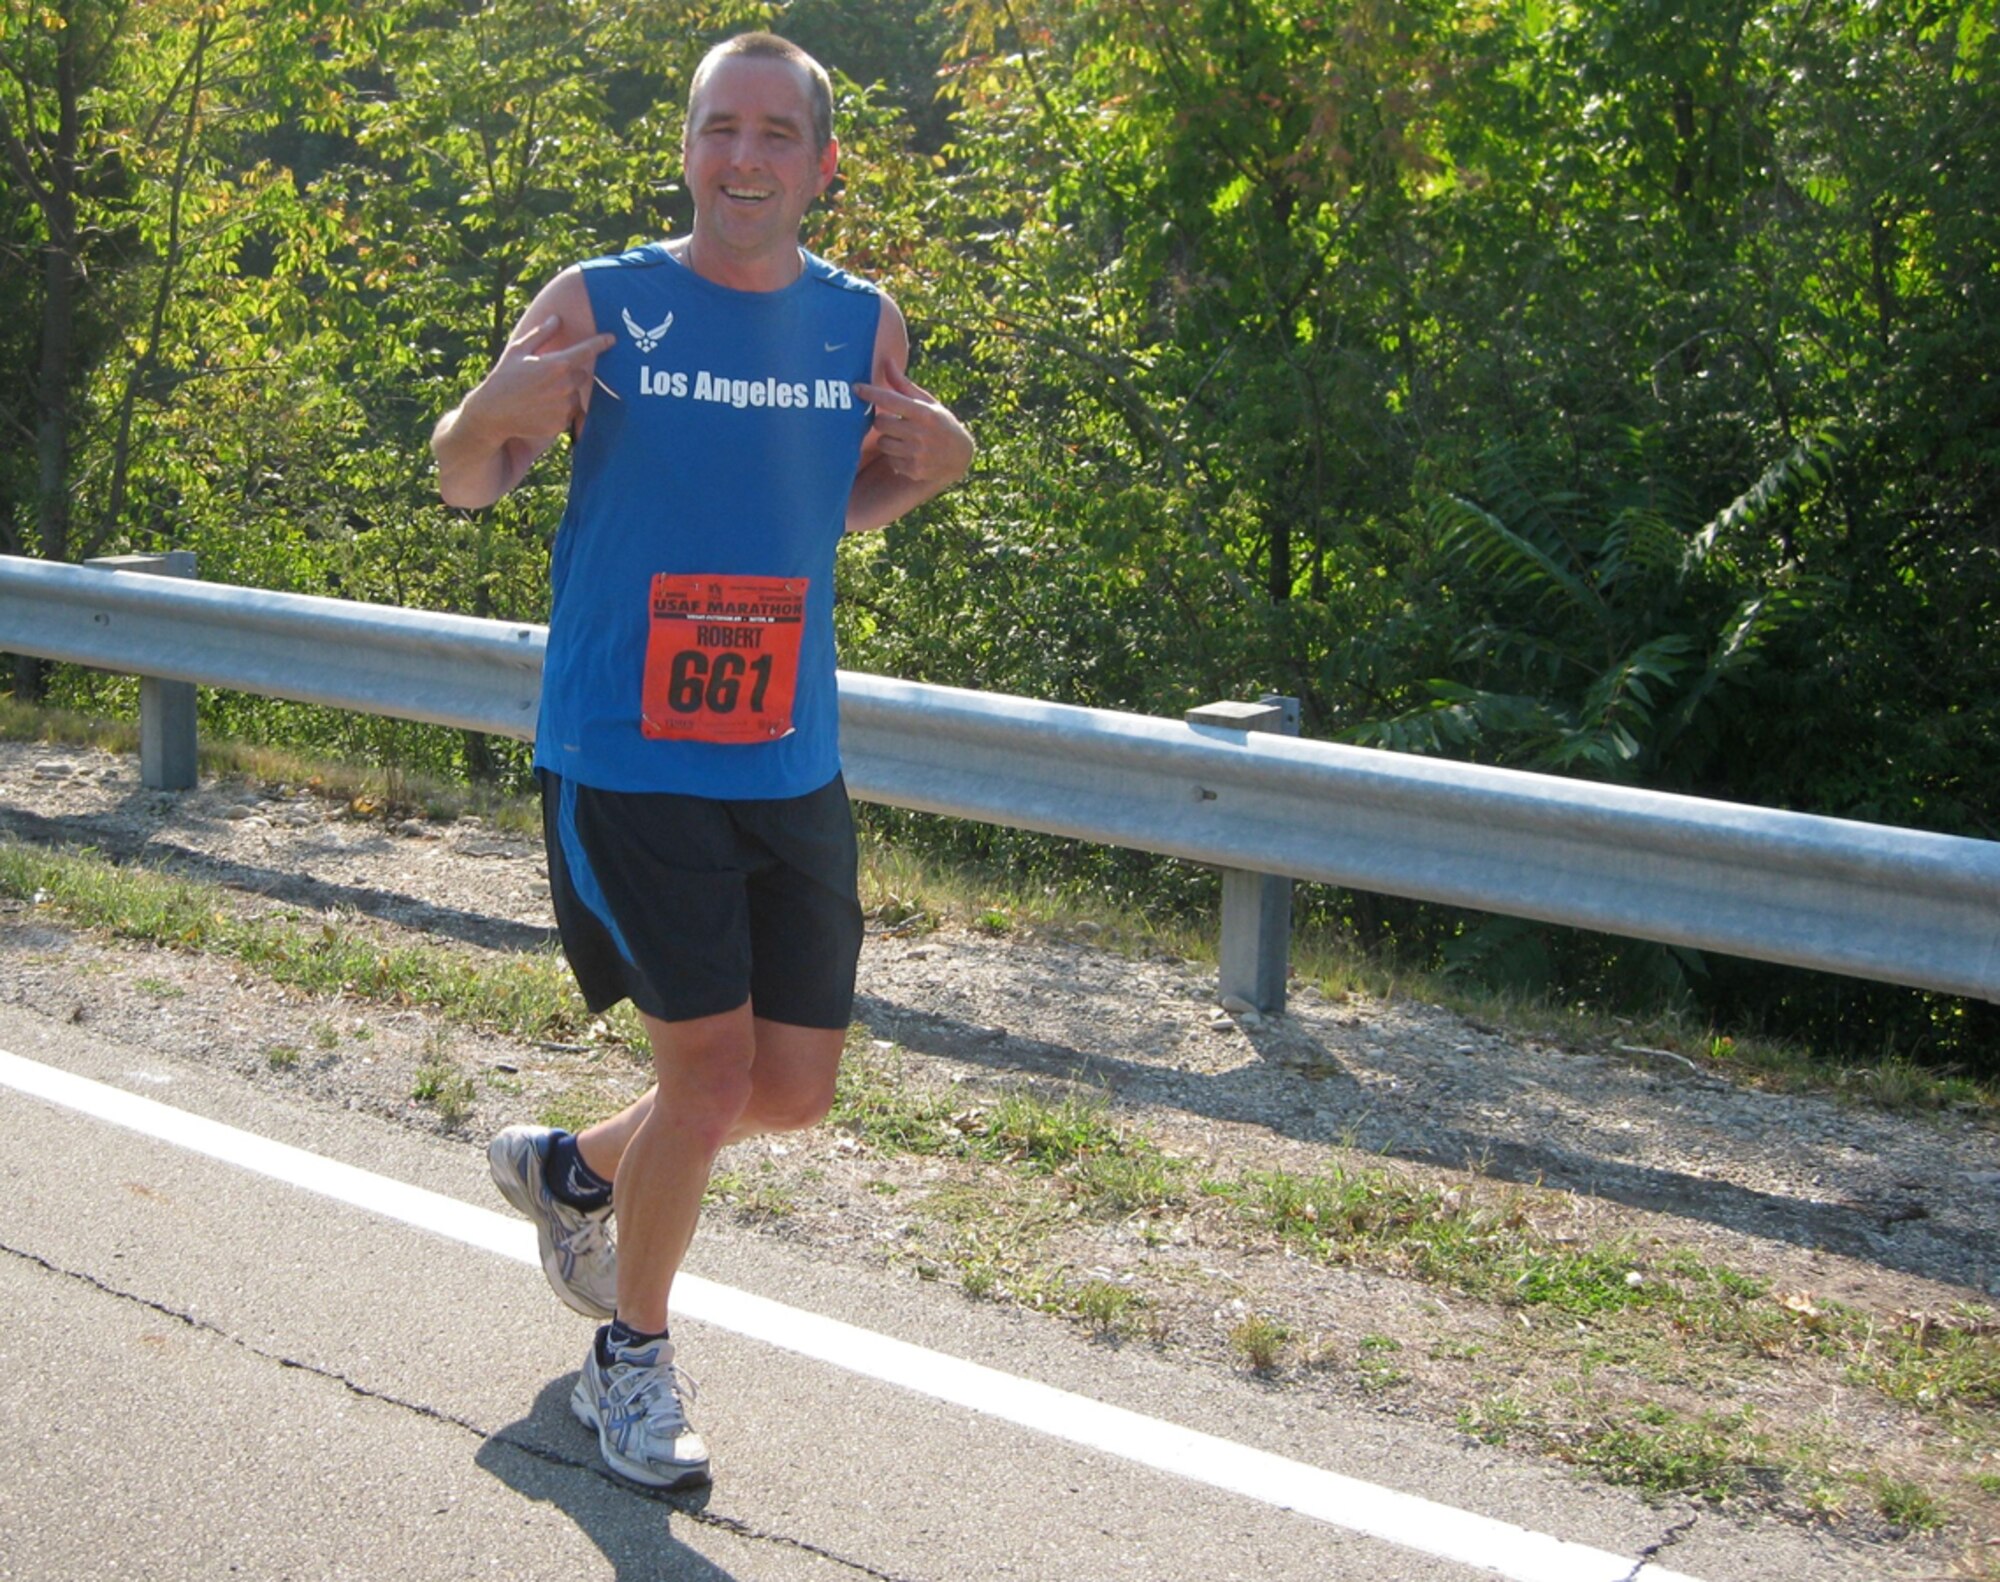 Maj. Bob Frank shows his LAAFB Team pride during 12th Annual Air Force Marathon held at Wright-Patterson AFB, Sept. 20. The major finished the race in 3 hours, 36 minutes.